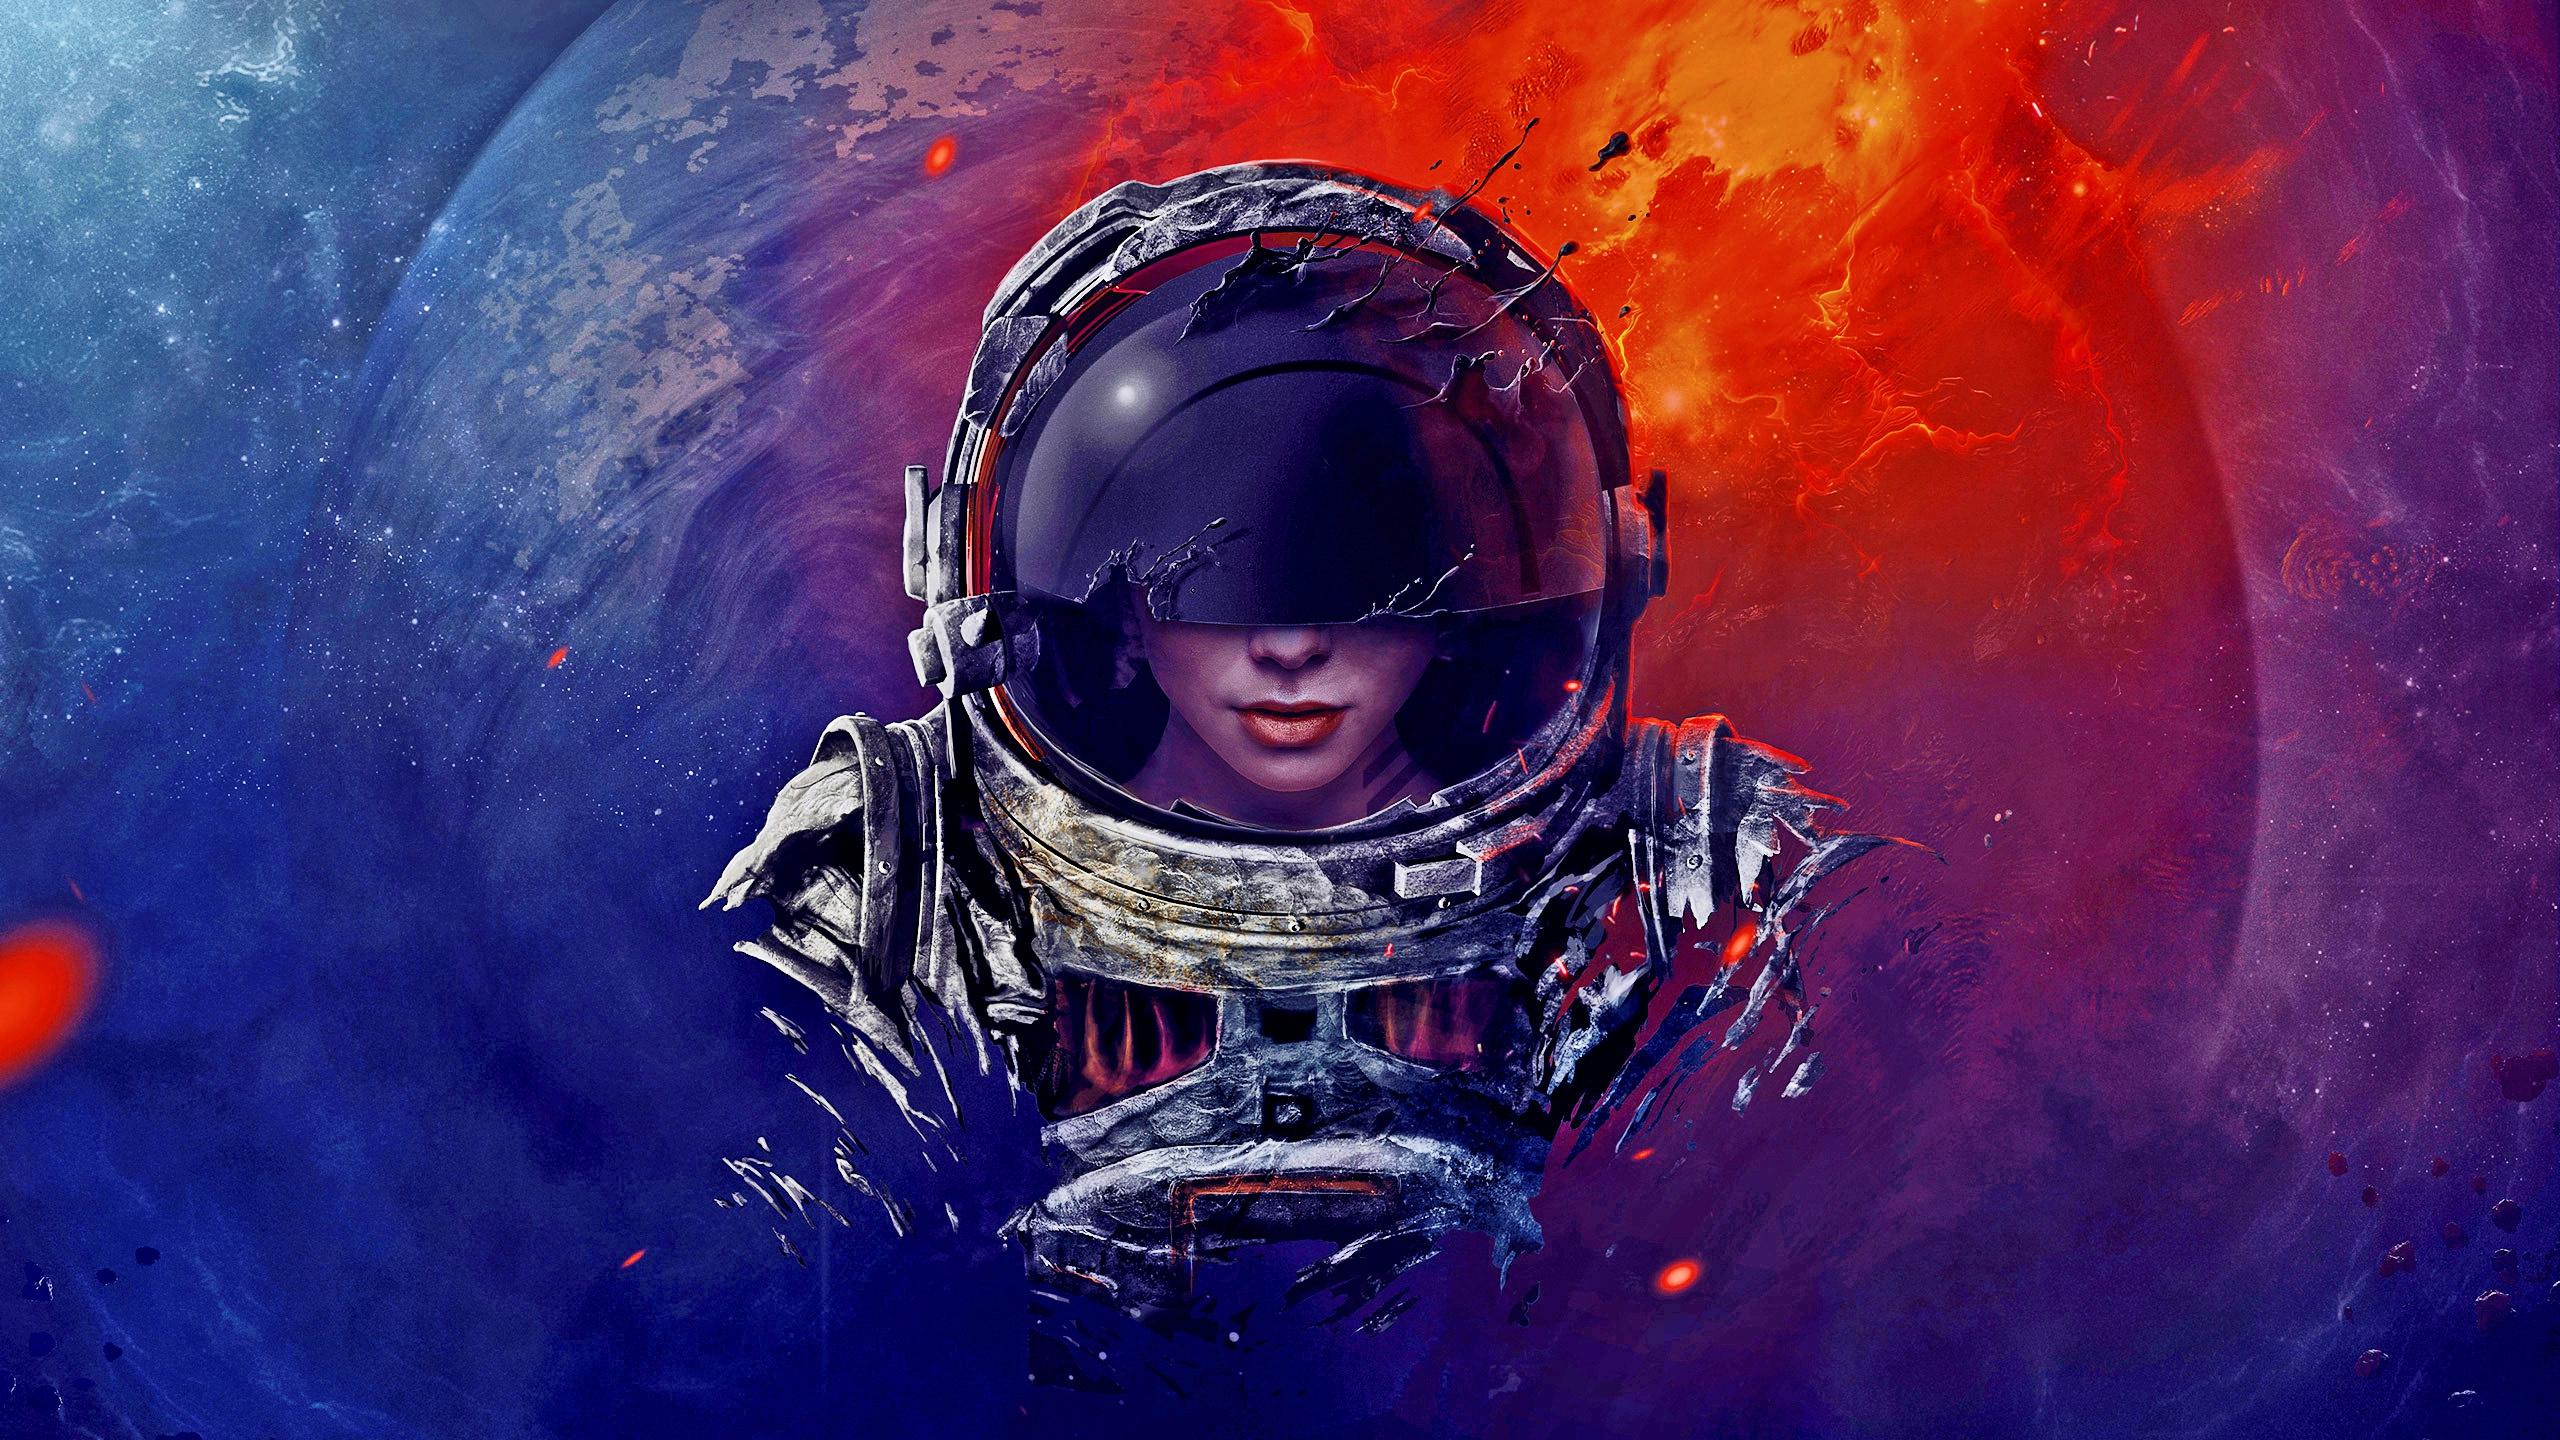  astronaut  4K  wallpapers  for your desktop or mobile screen 